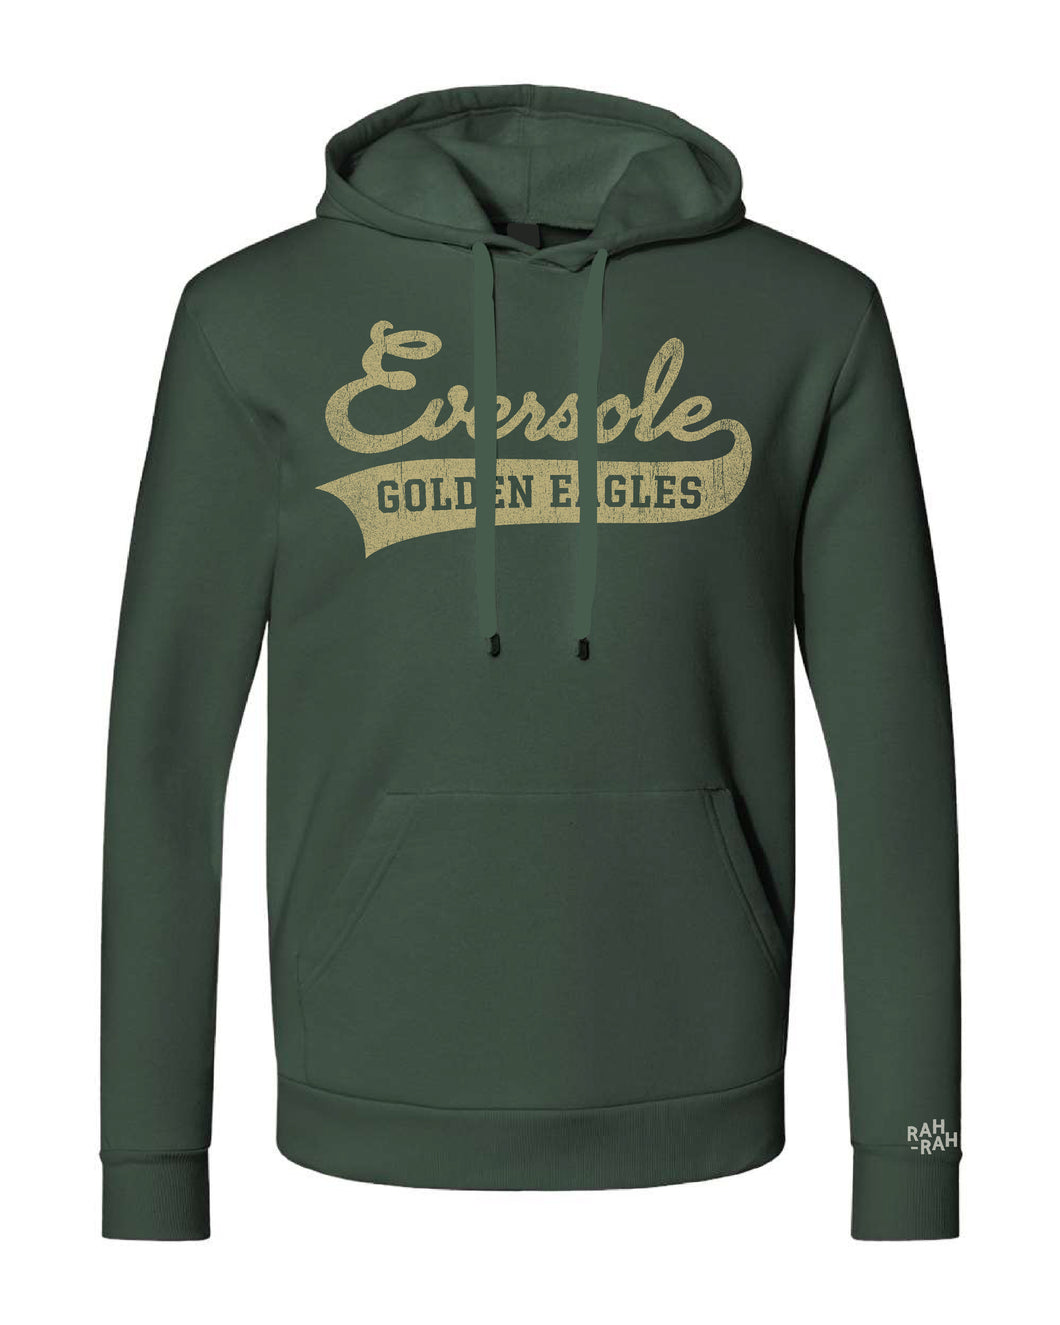 Eversole Script Unisex Hoodie | Forest Green | YOUTH & ADULT